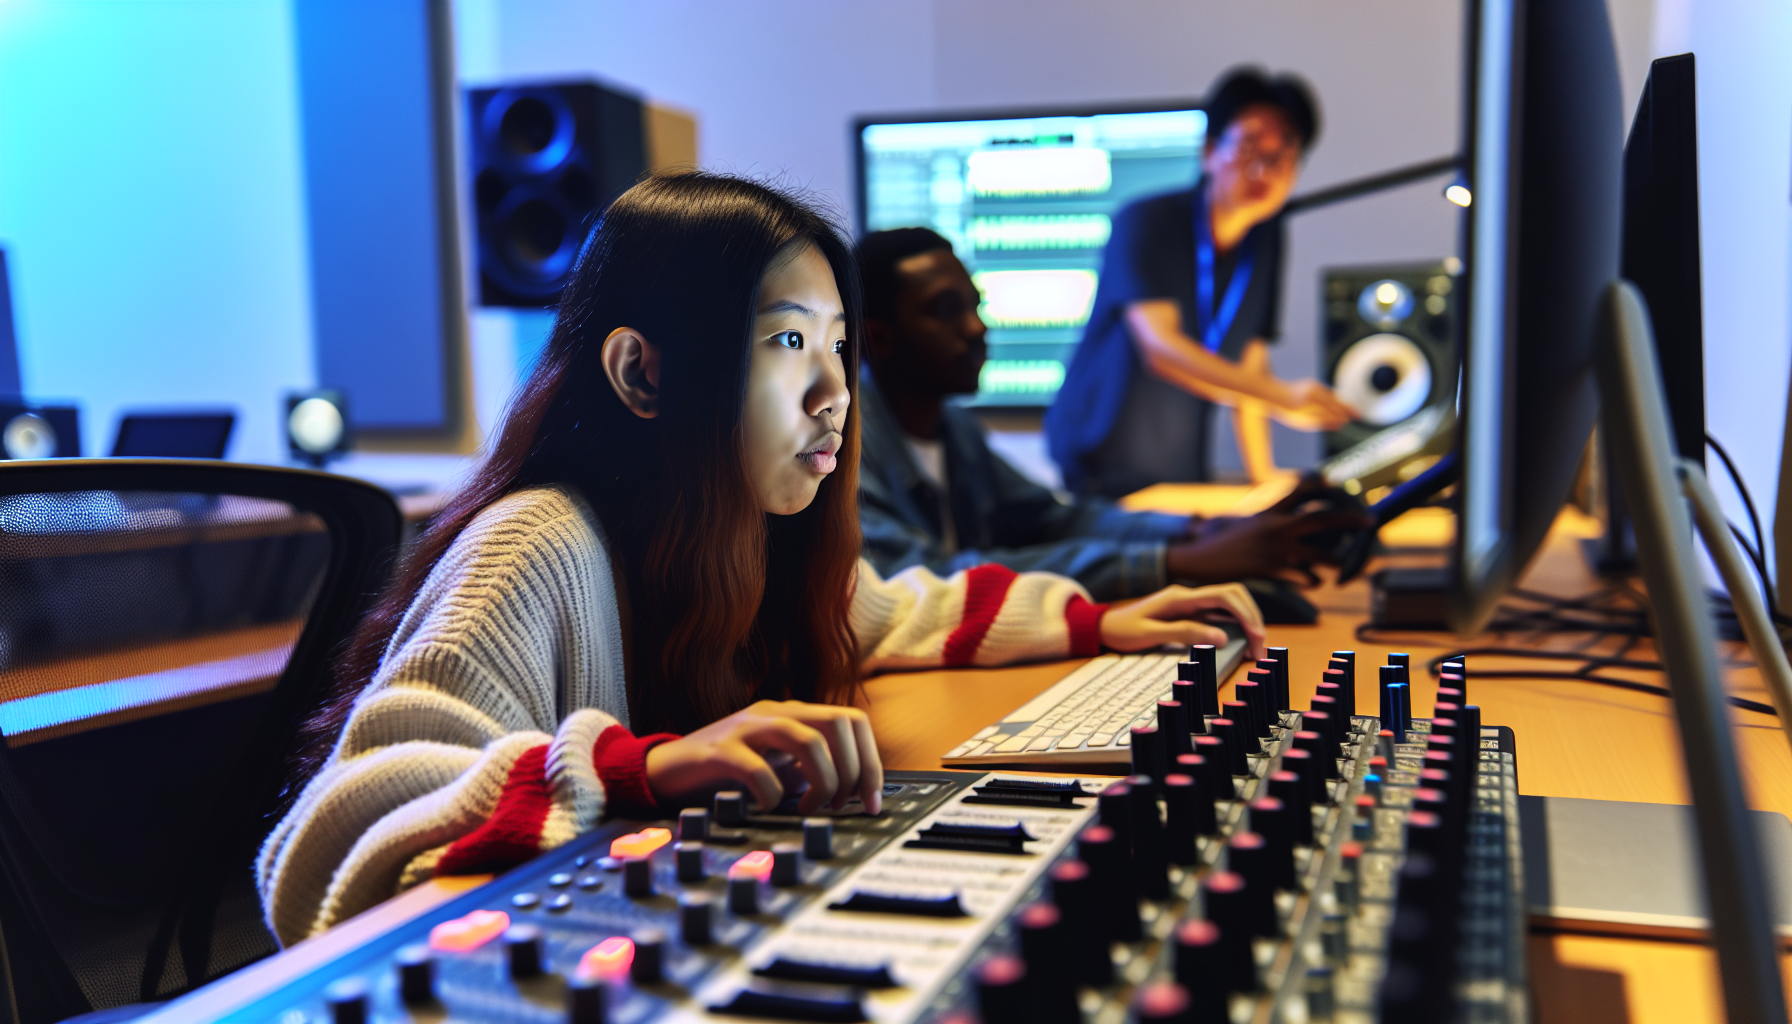 Sound engineering student mastering audio effects